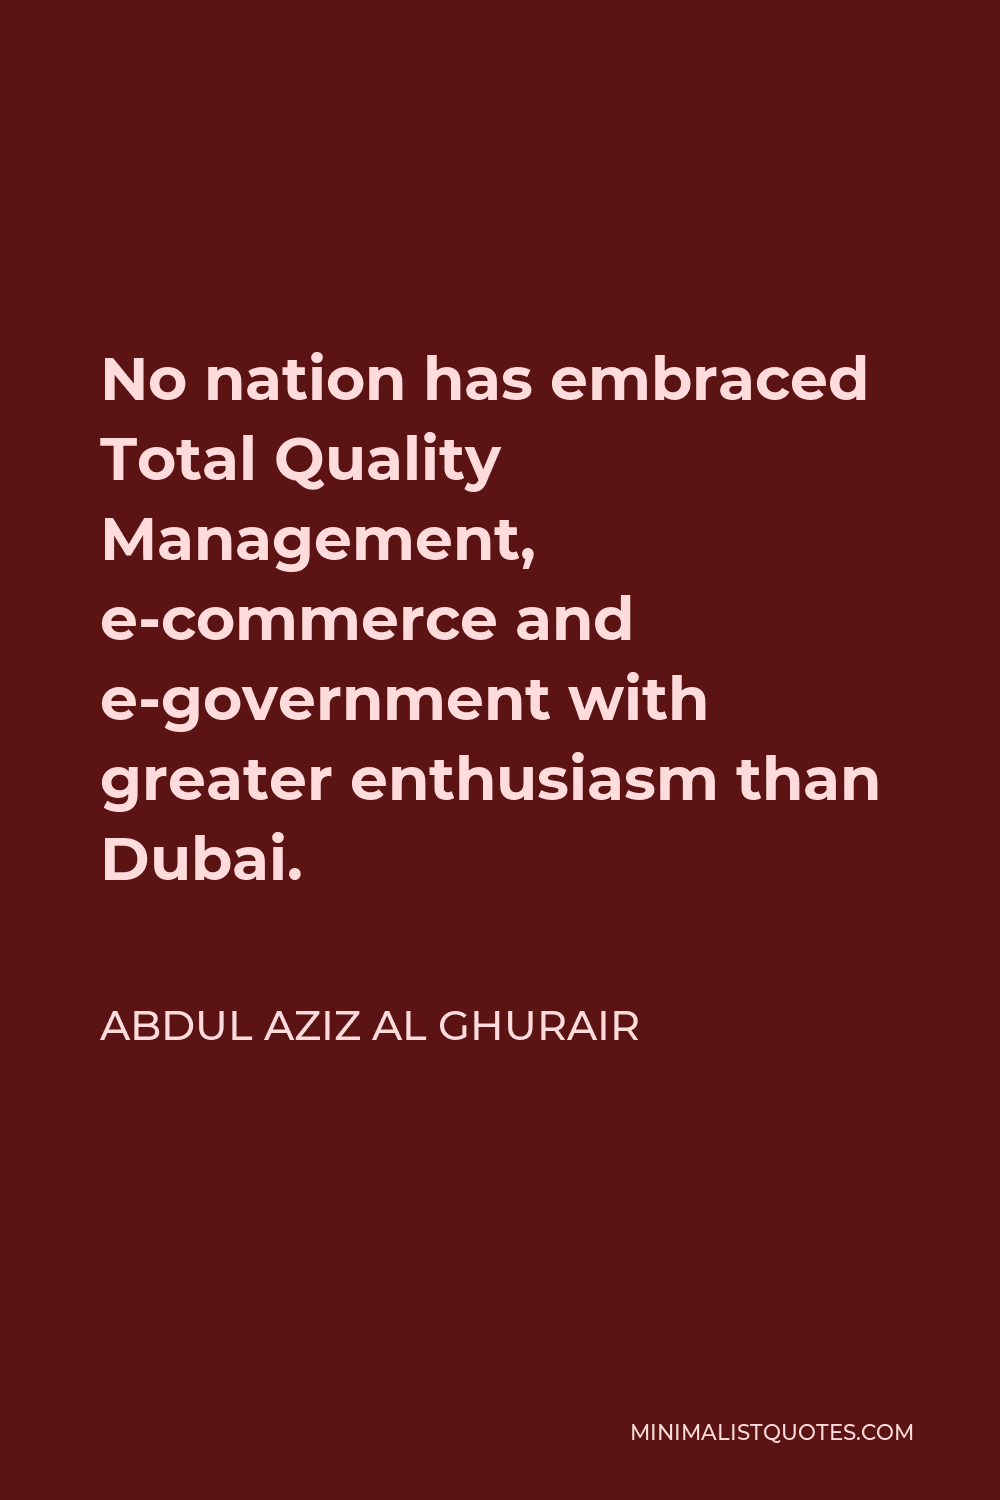 Abdul Aziz Al Ghurair Quote - No nation has embraced Total Quality Management, e-commerce and e-government with greater enthusiasm than Dubai.